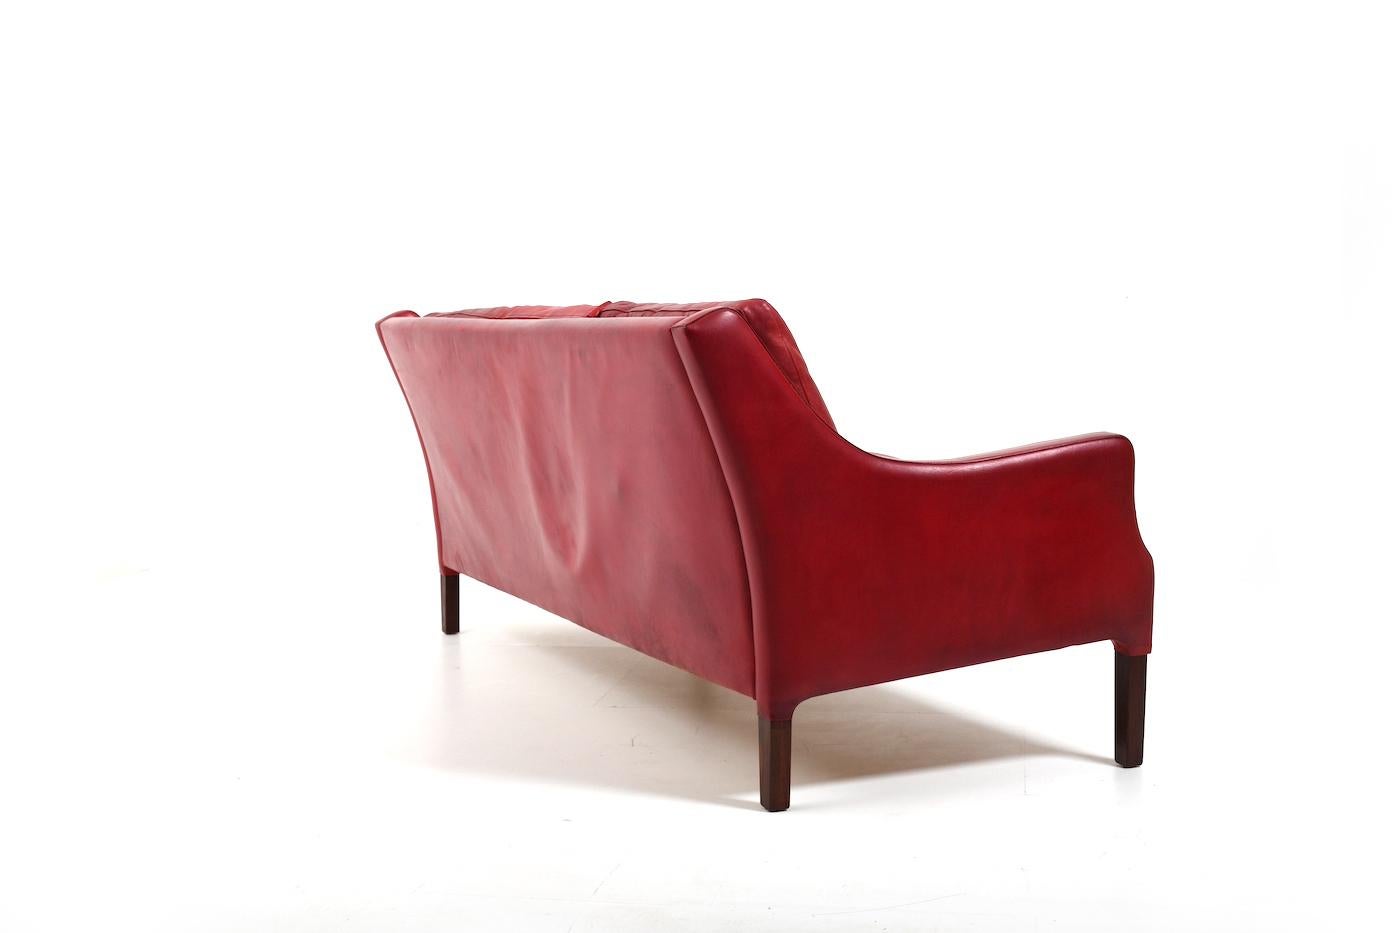 20th Century Patinated Indian Red Leather Sofa by Arne Wahl Iversen